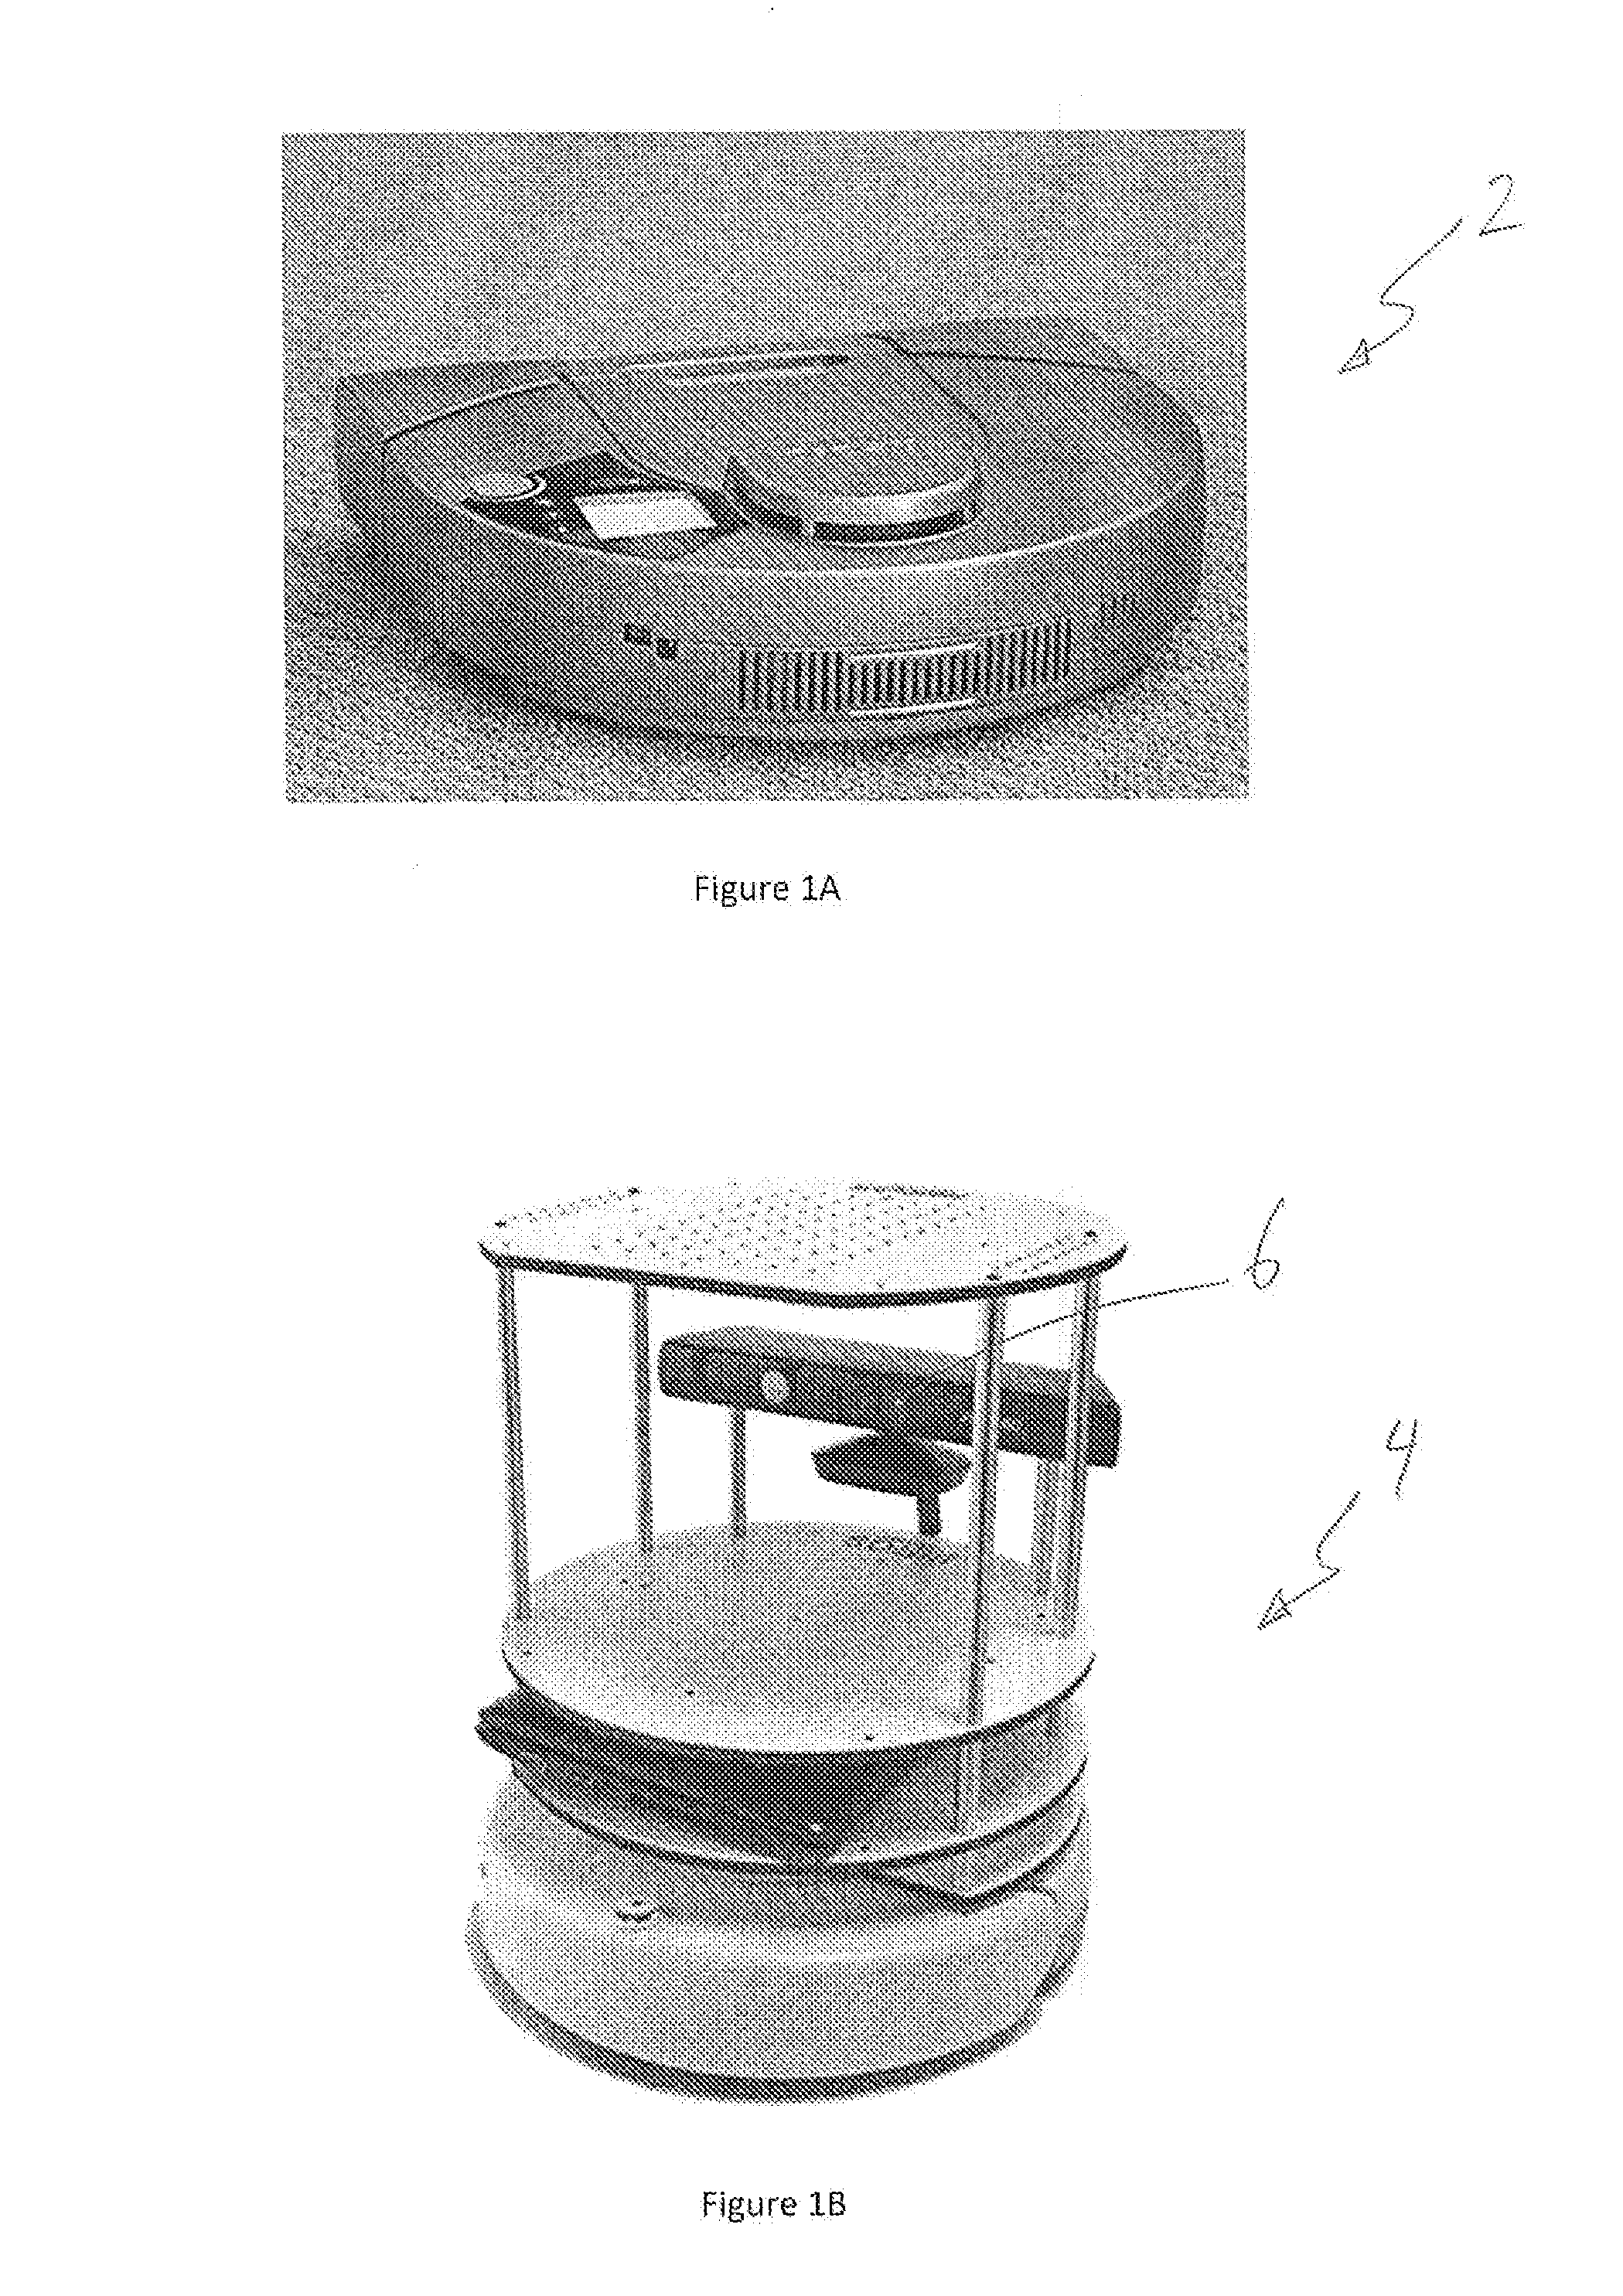 Personal robotic system and method